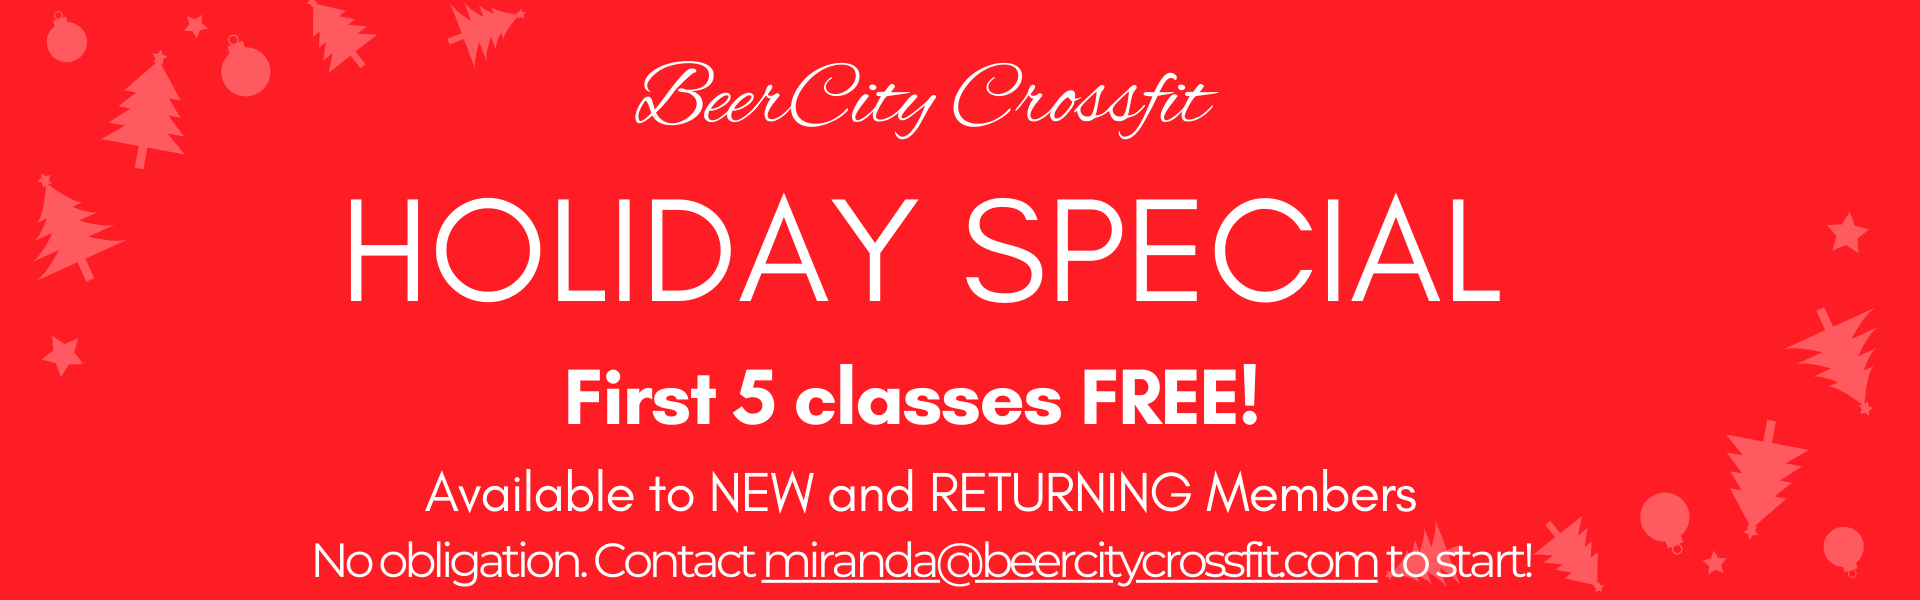 Holiday special -- first 5 classes free; available to new and returning members. No obligation. Contact miranda@crossfit.com to start